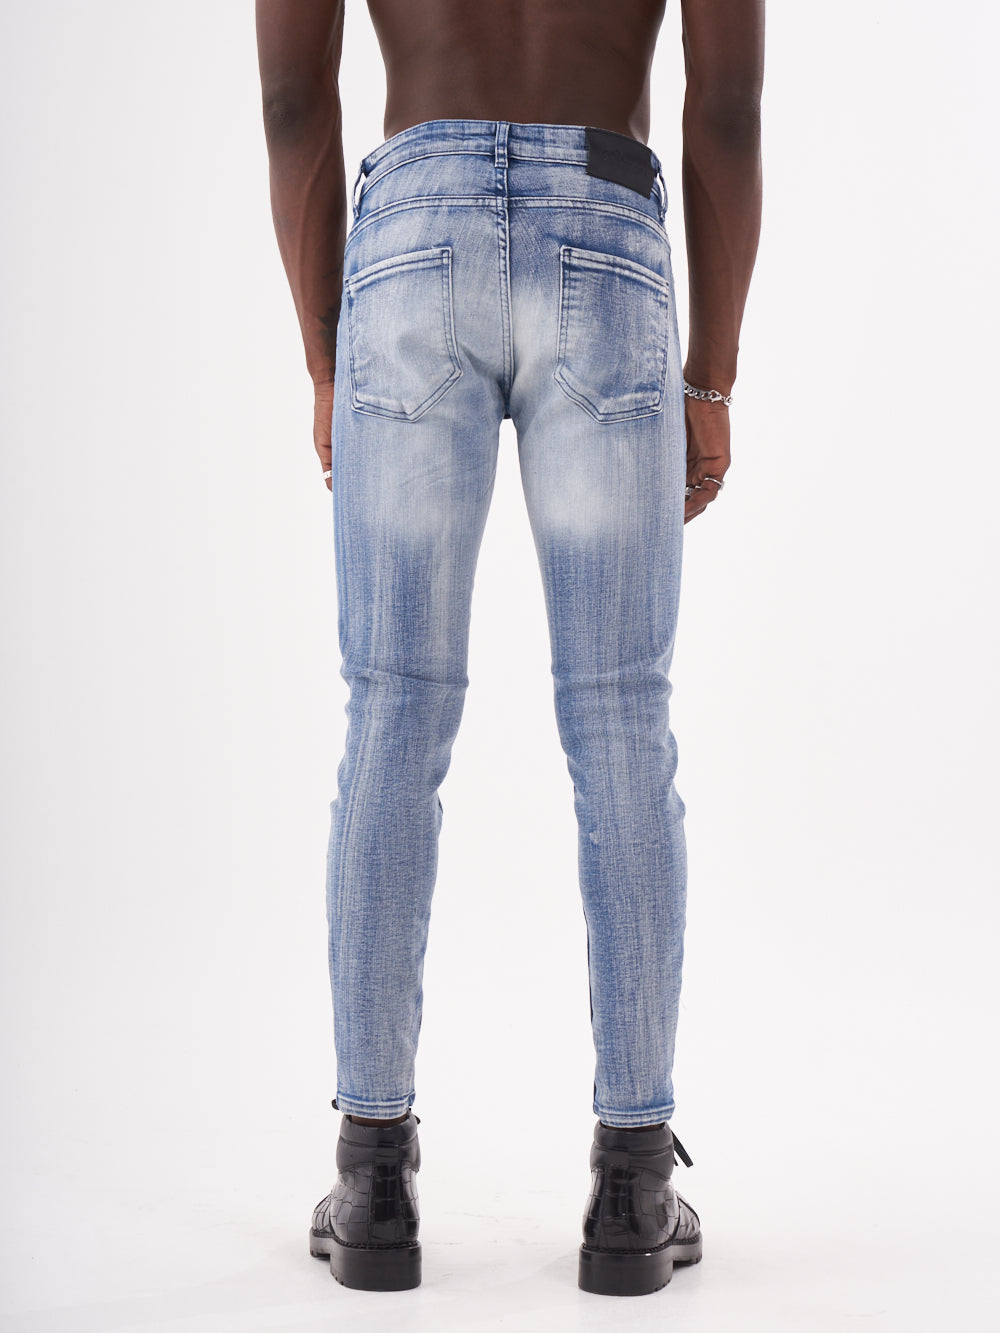 The back view of a man wearing MUTANT jeans.